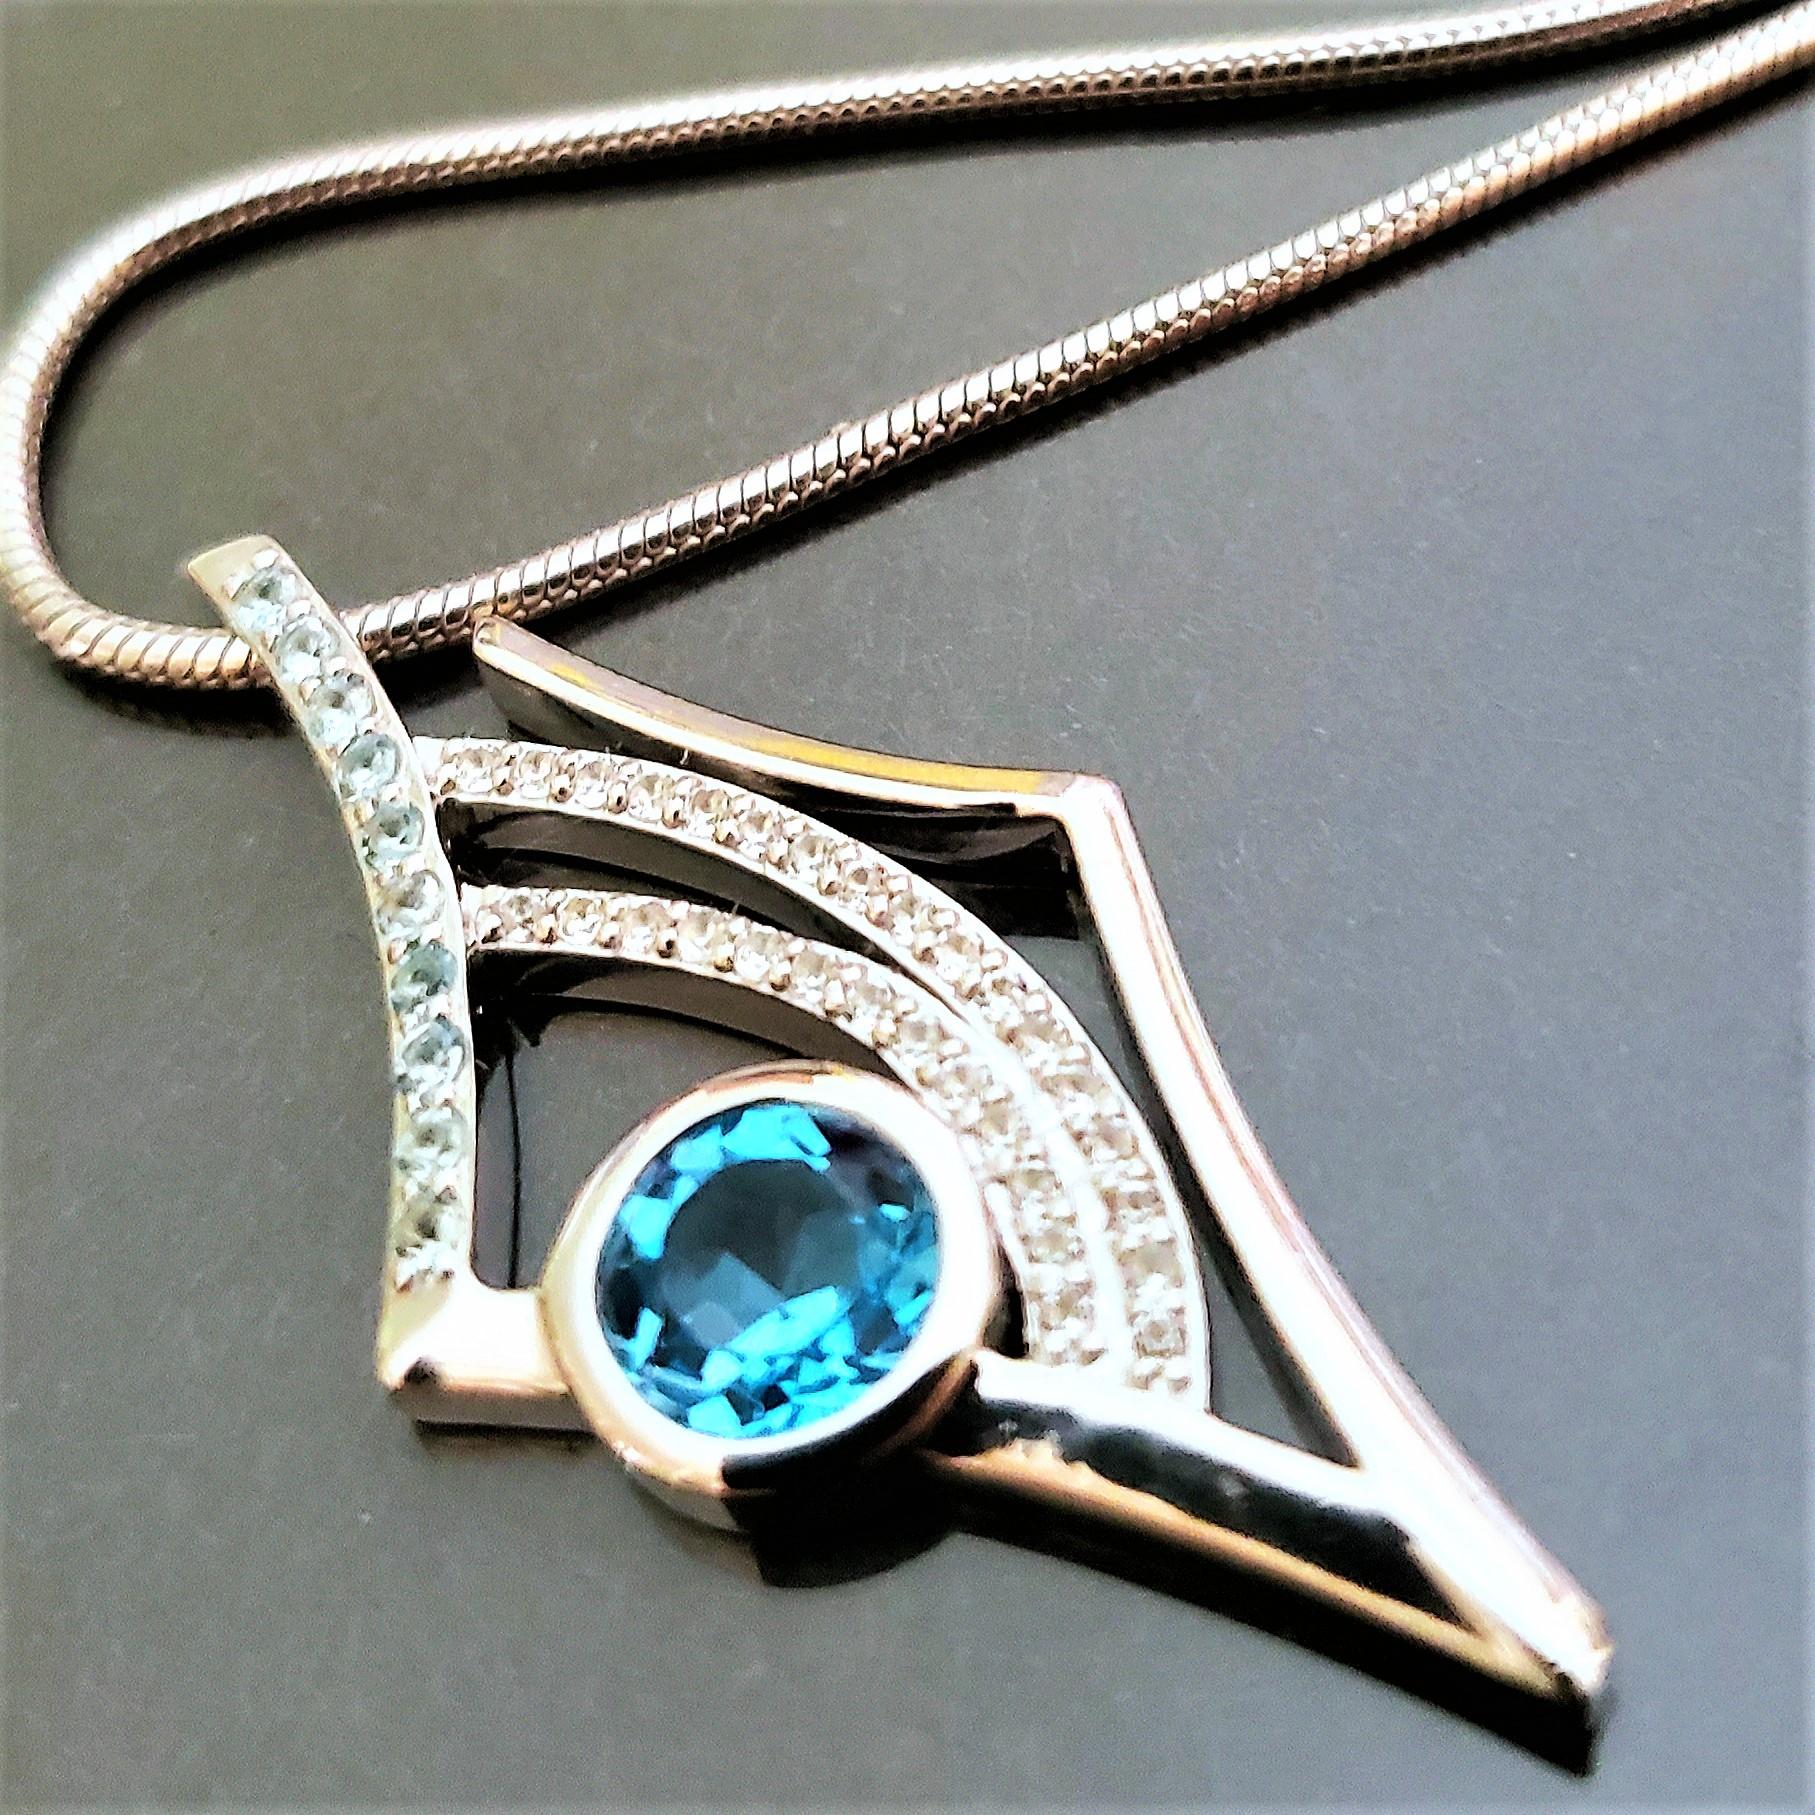 The Antares Origins sterling silver pendant (8.94 gms) is made with a sparkling 6mm Swiss blue topaz. That stone is surrounded by beautiful blue and white sparkling topaz melee. There are thirty - 1mm  stones and ten - 1.4mm blue topaz. Everything